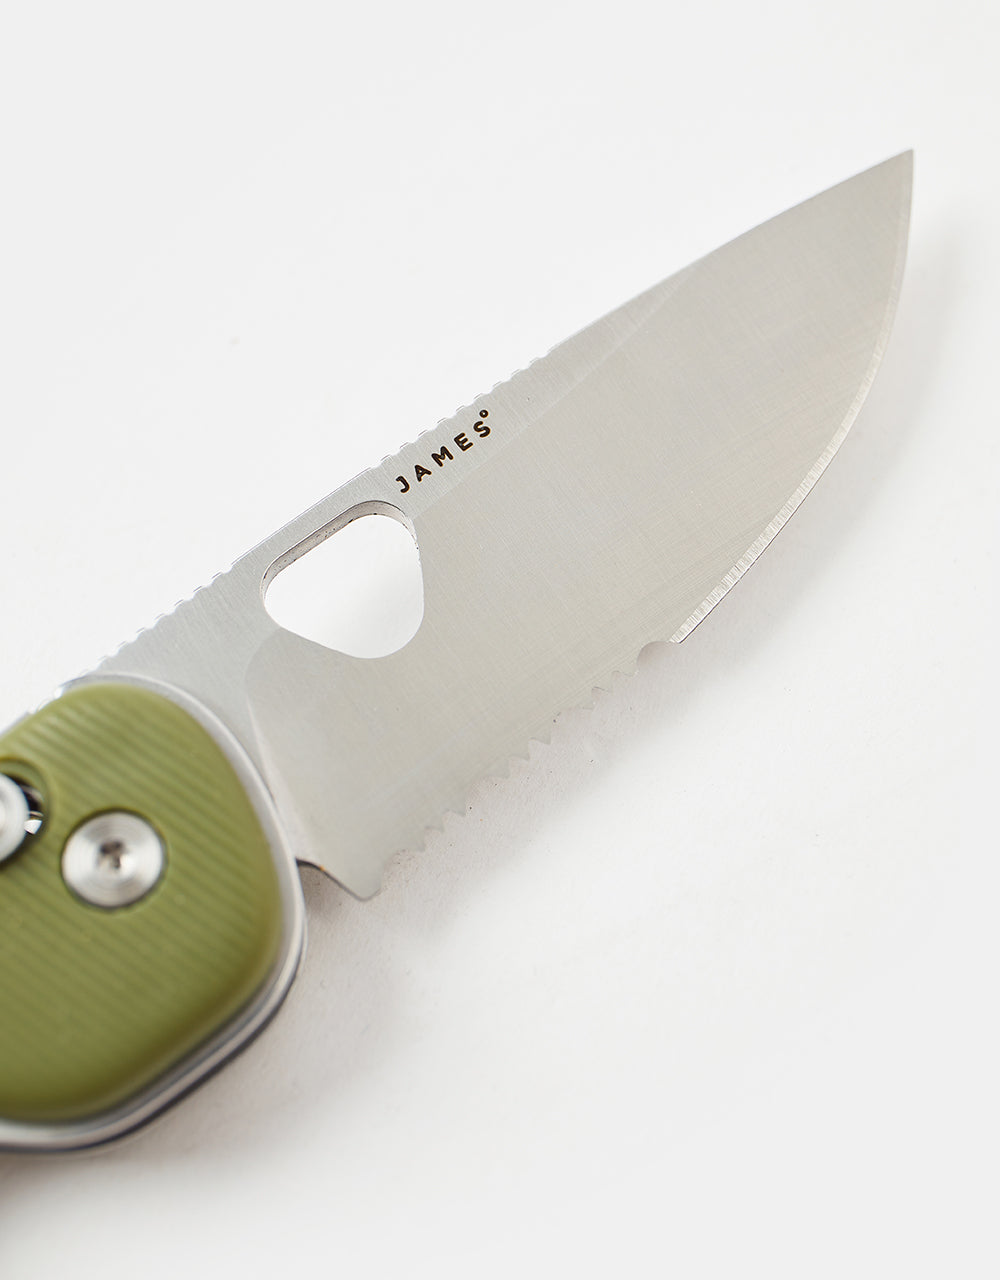 James The Redstone Adventure Knife - OD Green/Stainless/Serrated